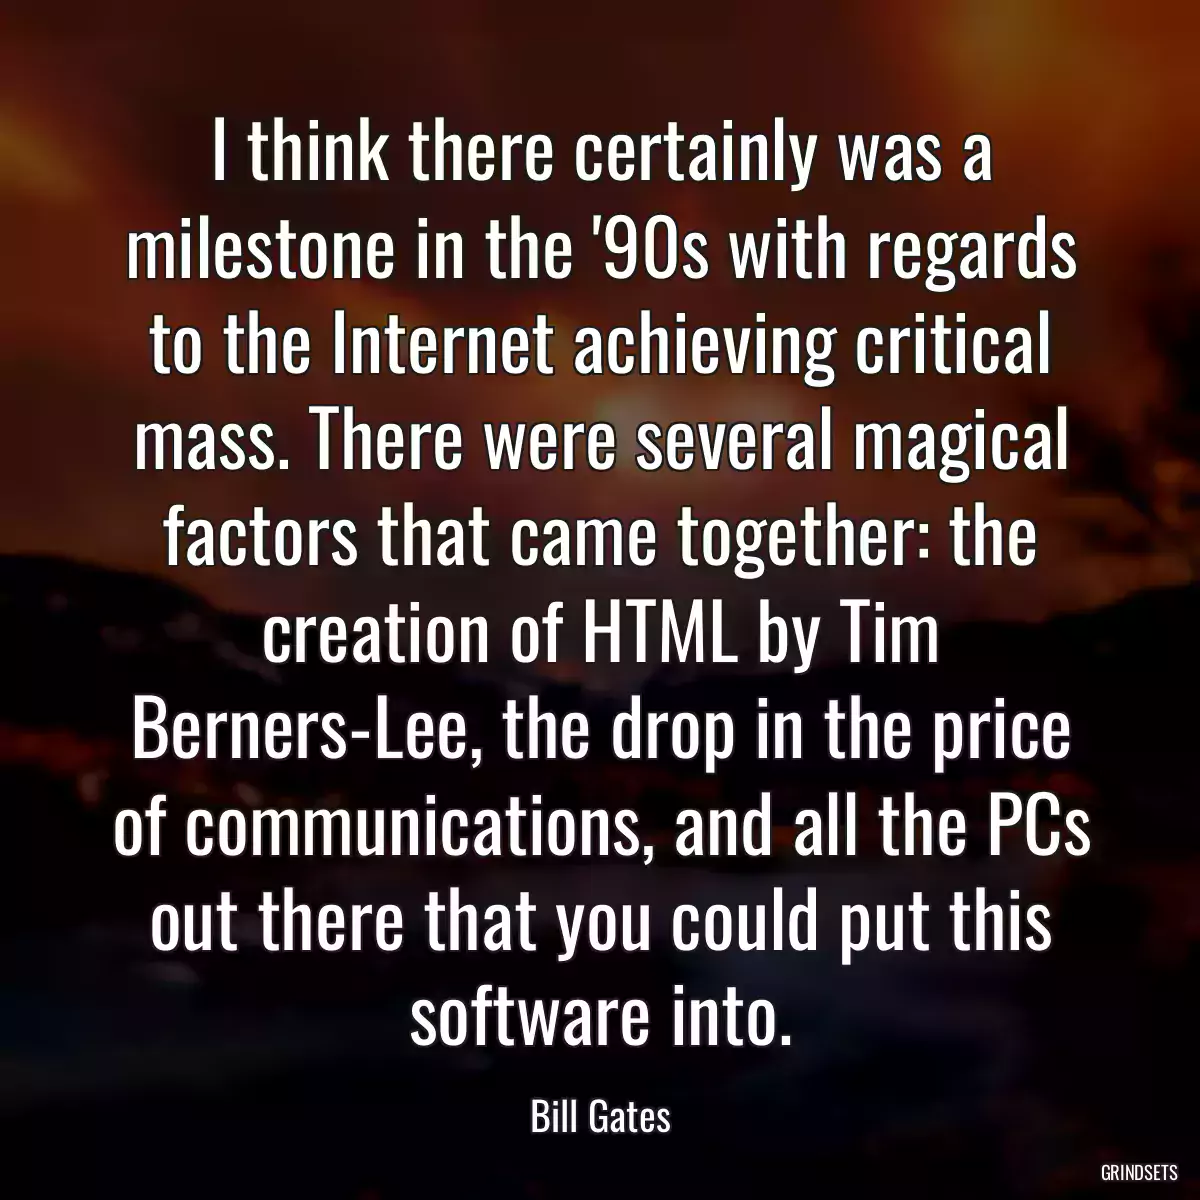 I think there certainly was a milestone in the \'90s with regards to the Internet achieving critical mass. There were several magical factors that came together: the creation of HTML by Tim Berners-Lee, the drop in the price of communications, and all the PCs out there that you could put this software into.